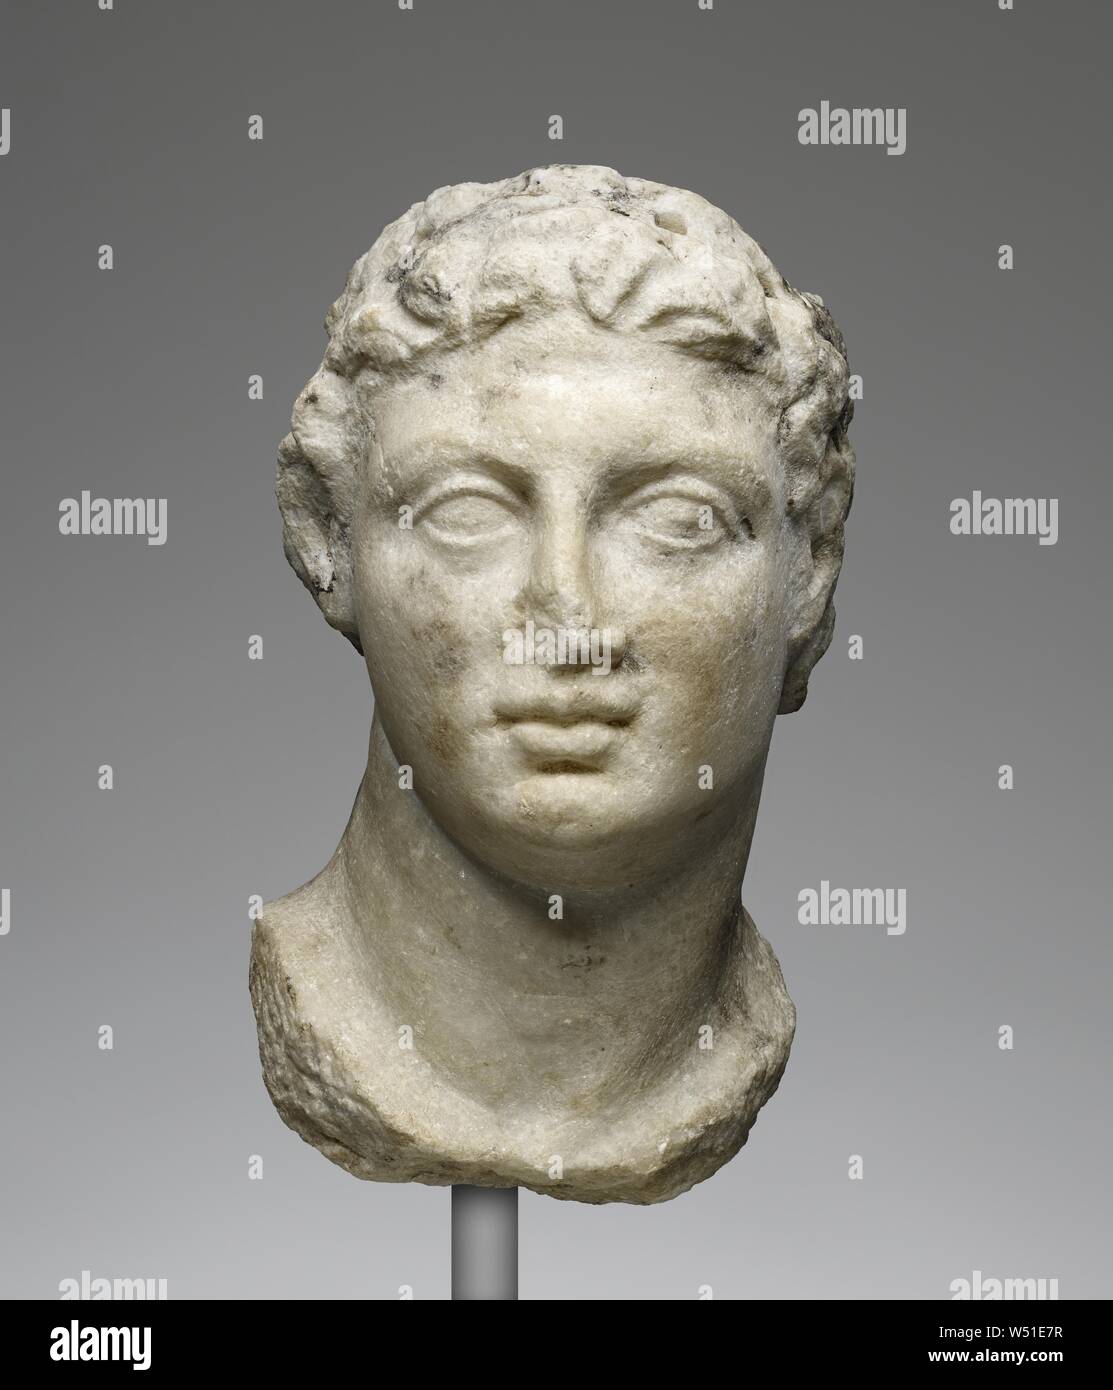 Head of Ptolemy III, Unknown, Egypt, 246 - 222 B.C., Marble, 16.8 × 9.1 × 11 cm (6 5/8 × 3 9/16 × 4 5/16 in Stock Photo